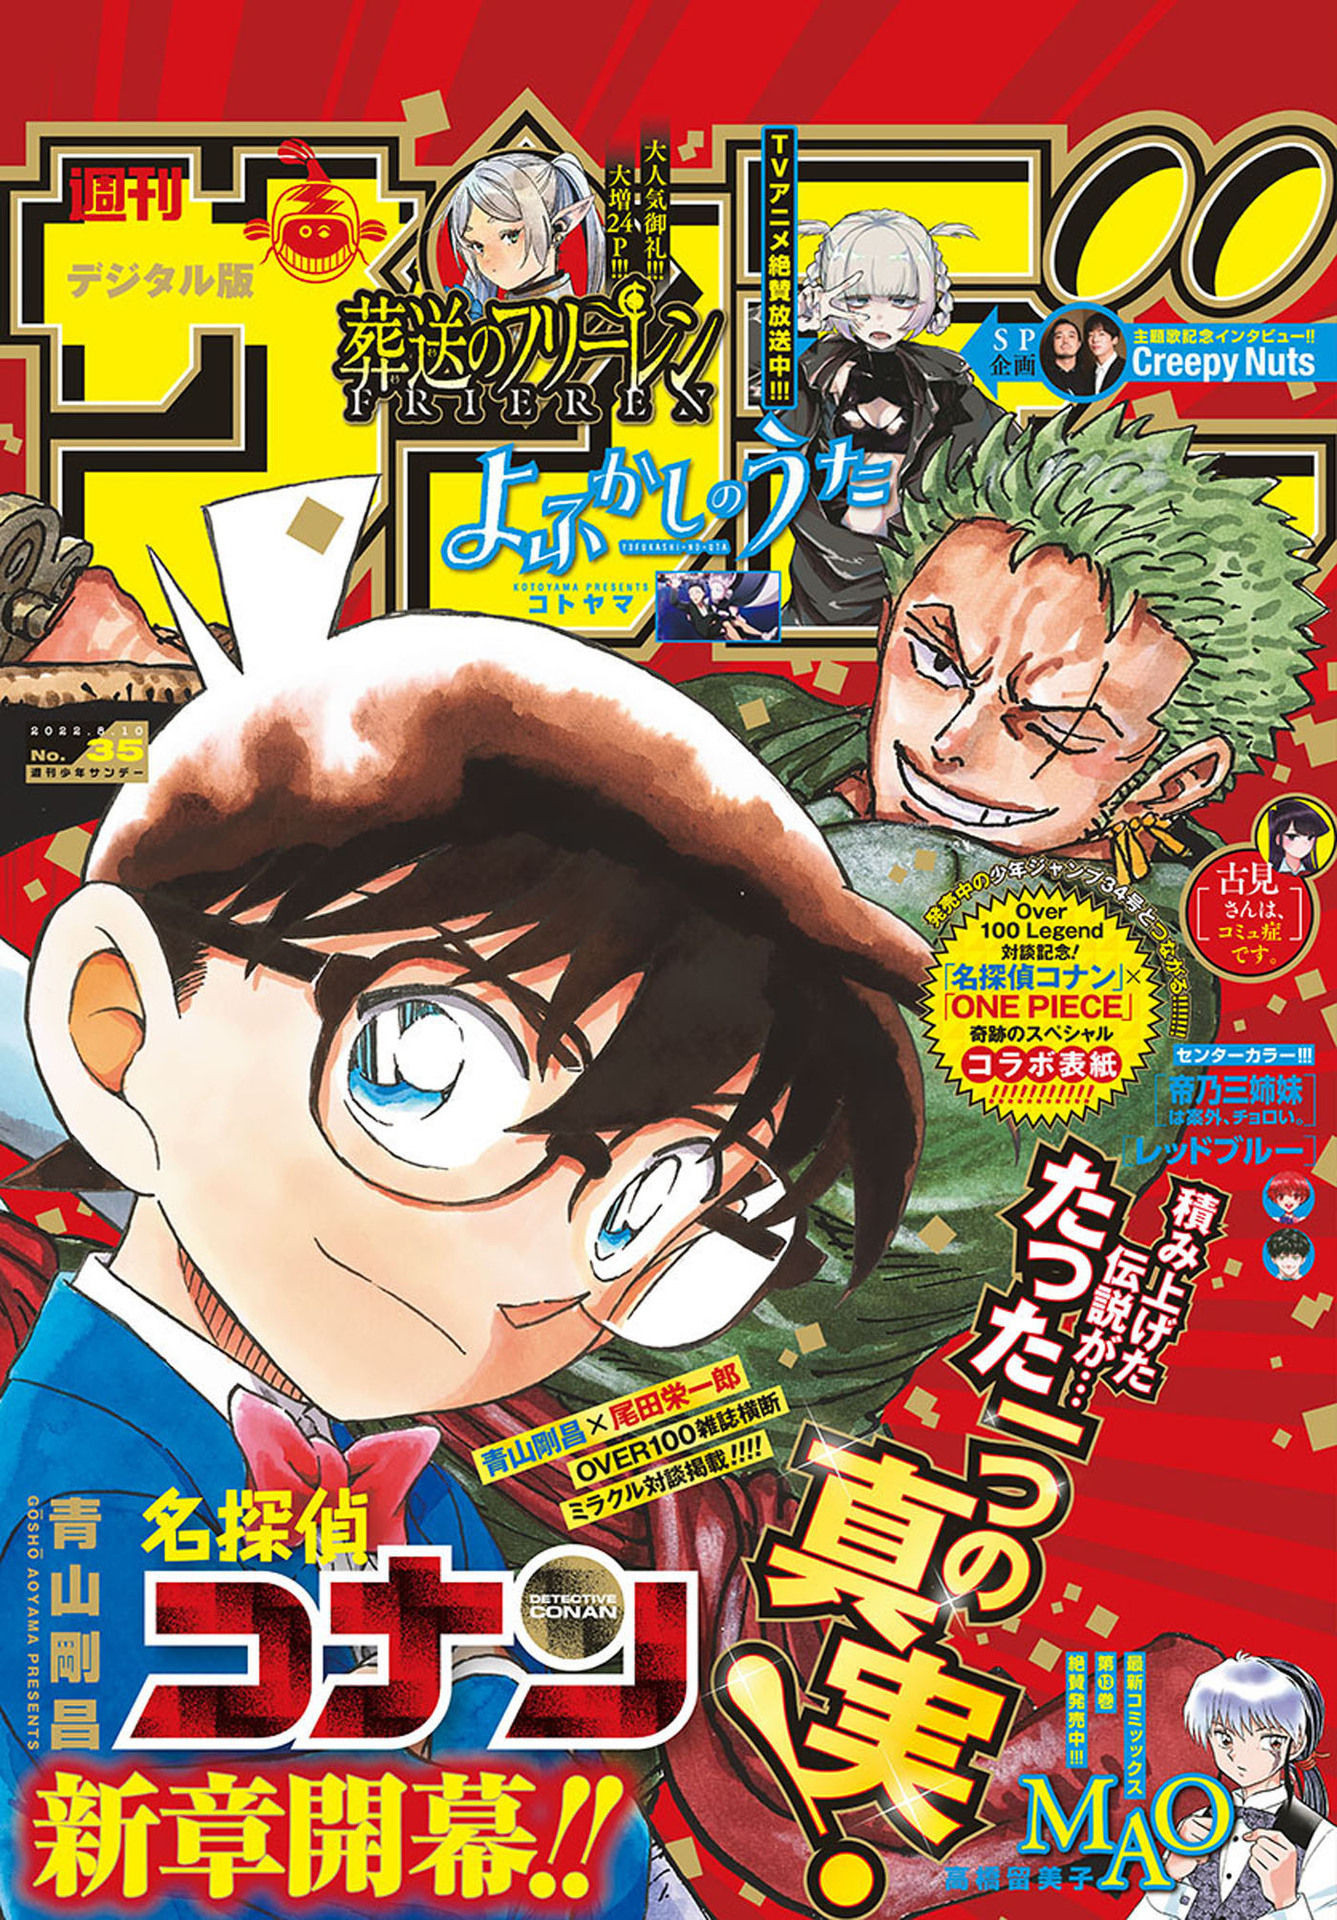 Detective Conan - Chapter 1097 - Page 1